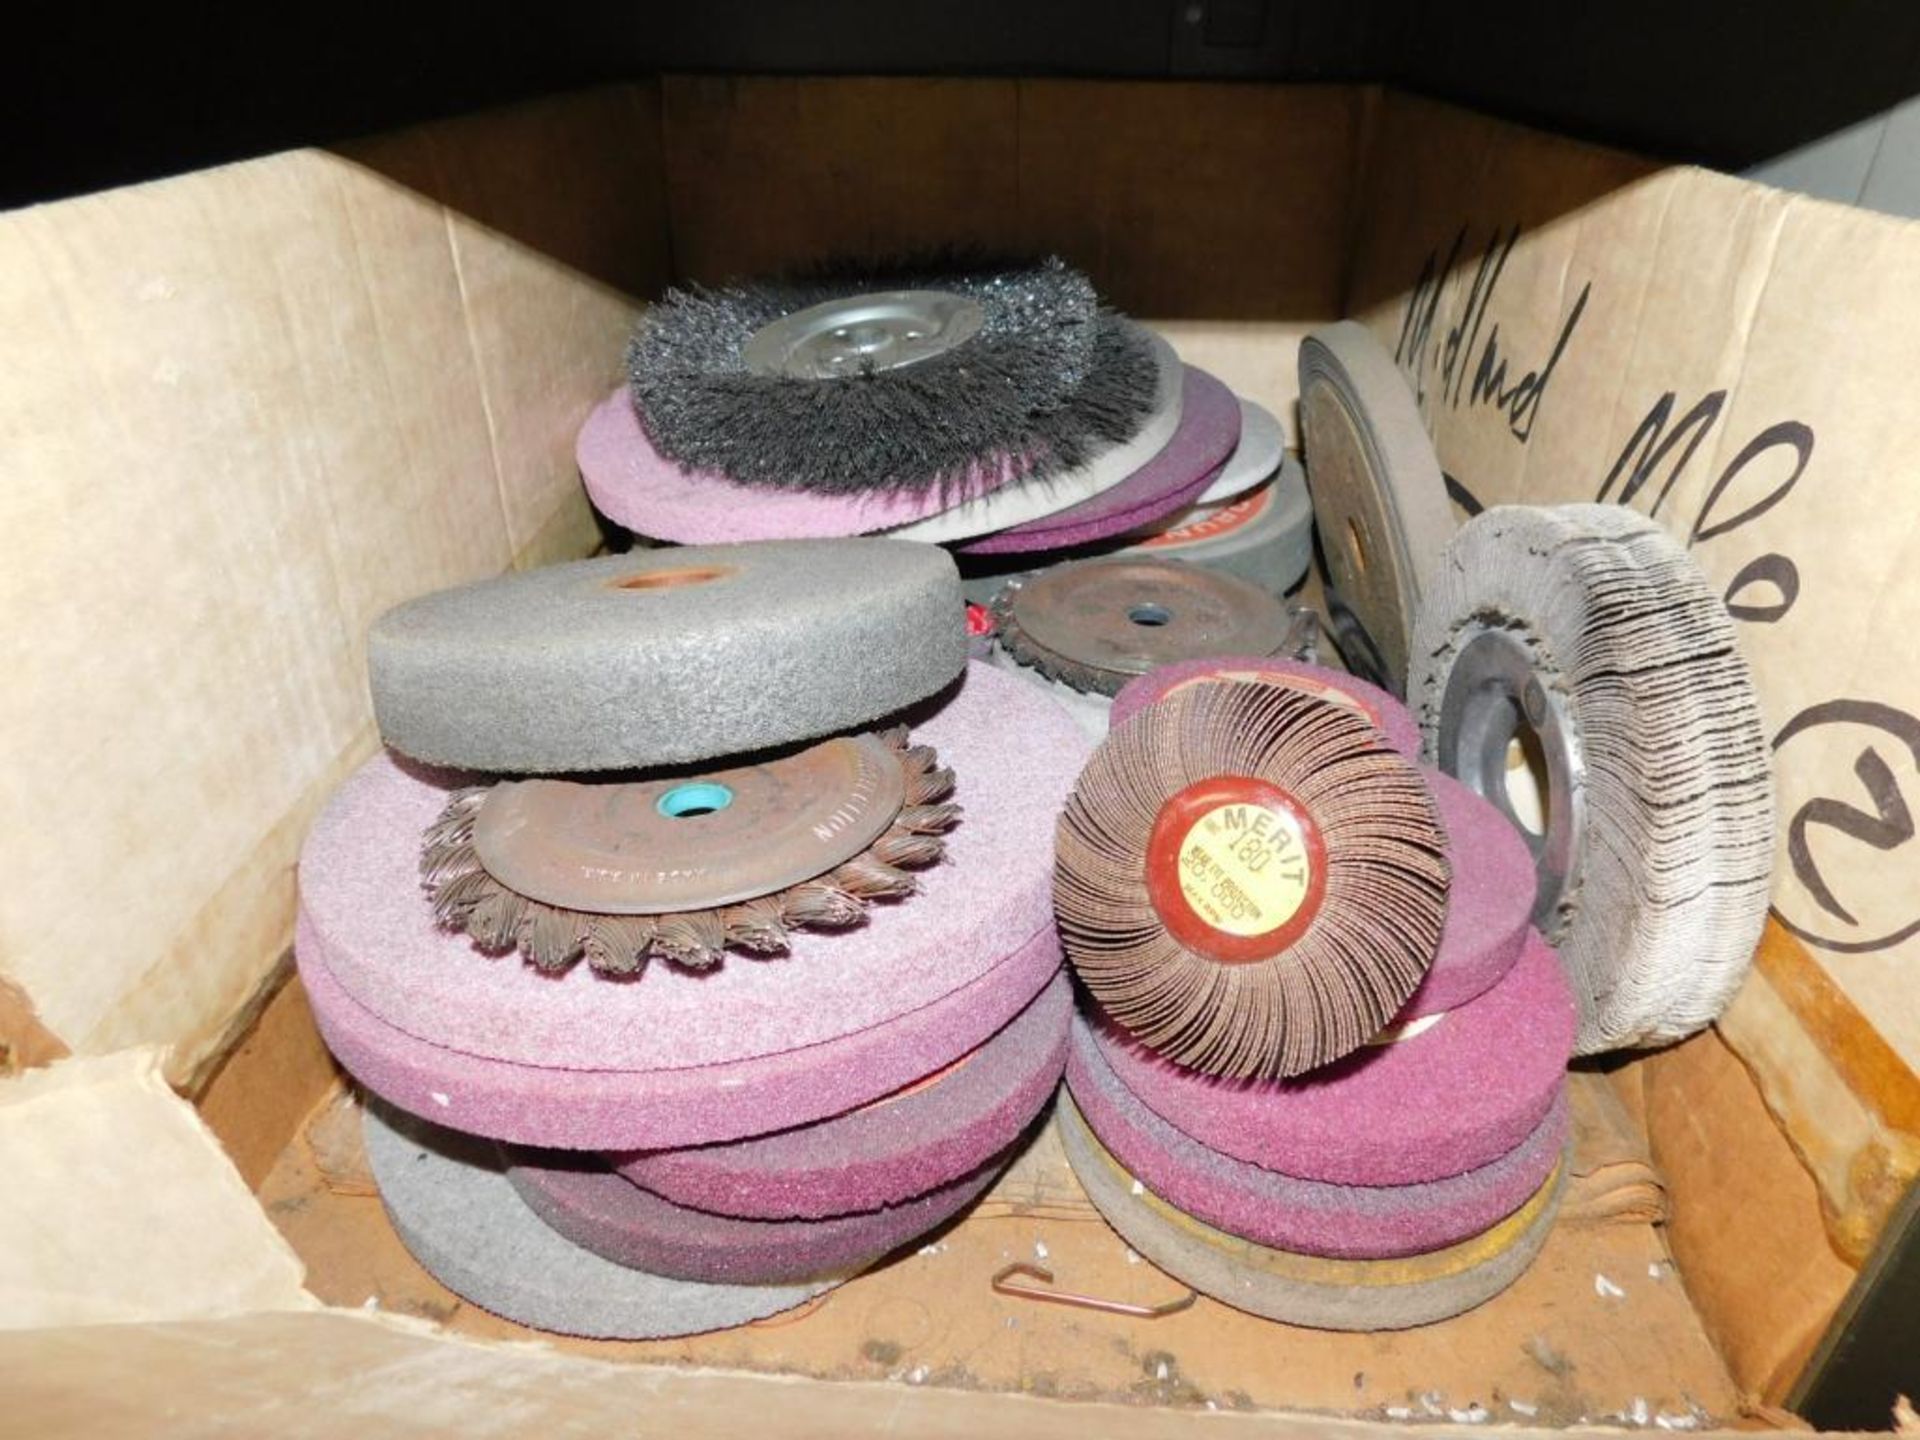 LOT: Contents of Rack: Large Quantity of Assorted Grinding Wheels, Cut Off Wheels, Polishing Stones, - Image 10 of 15